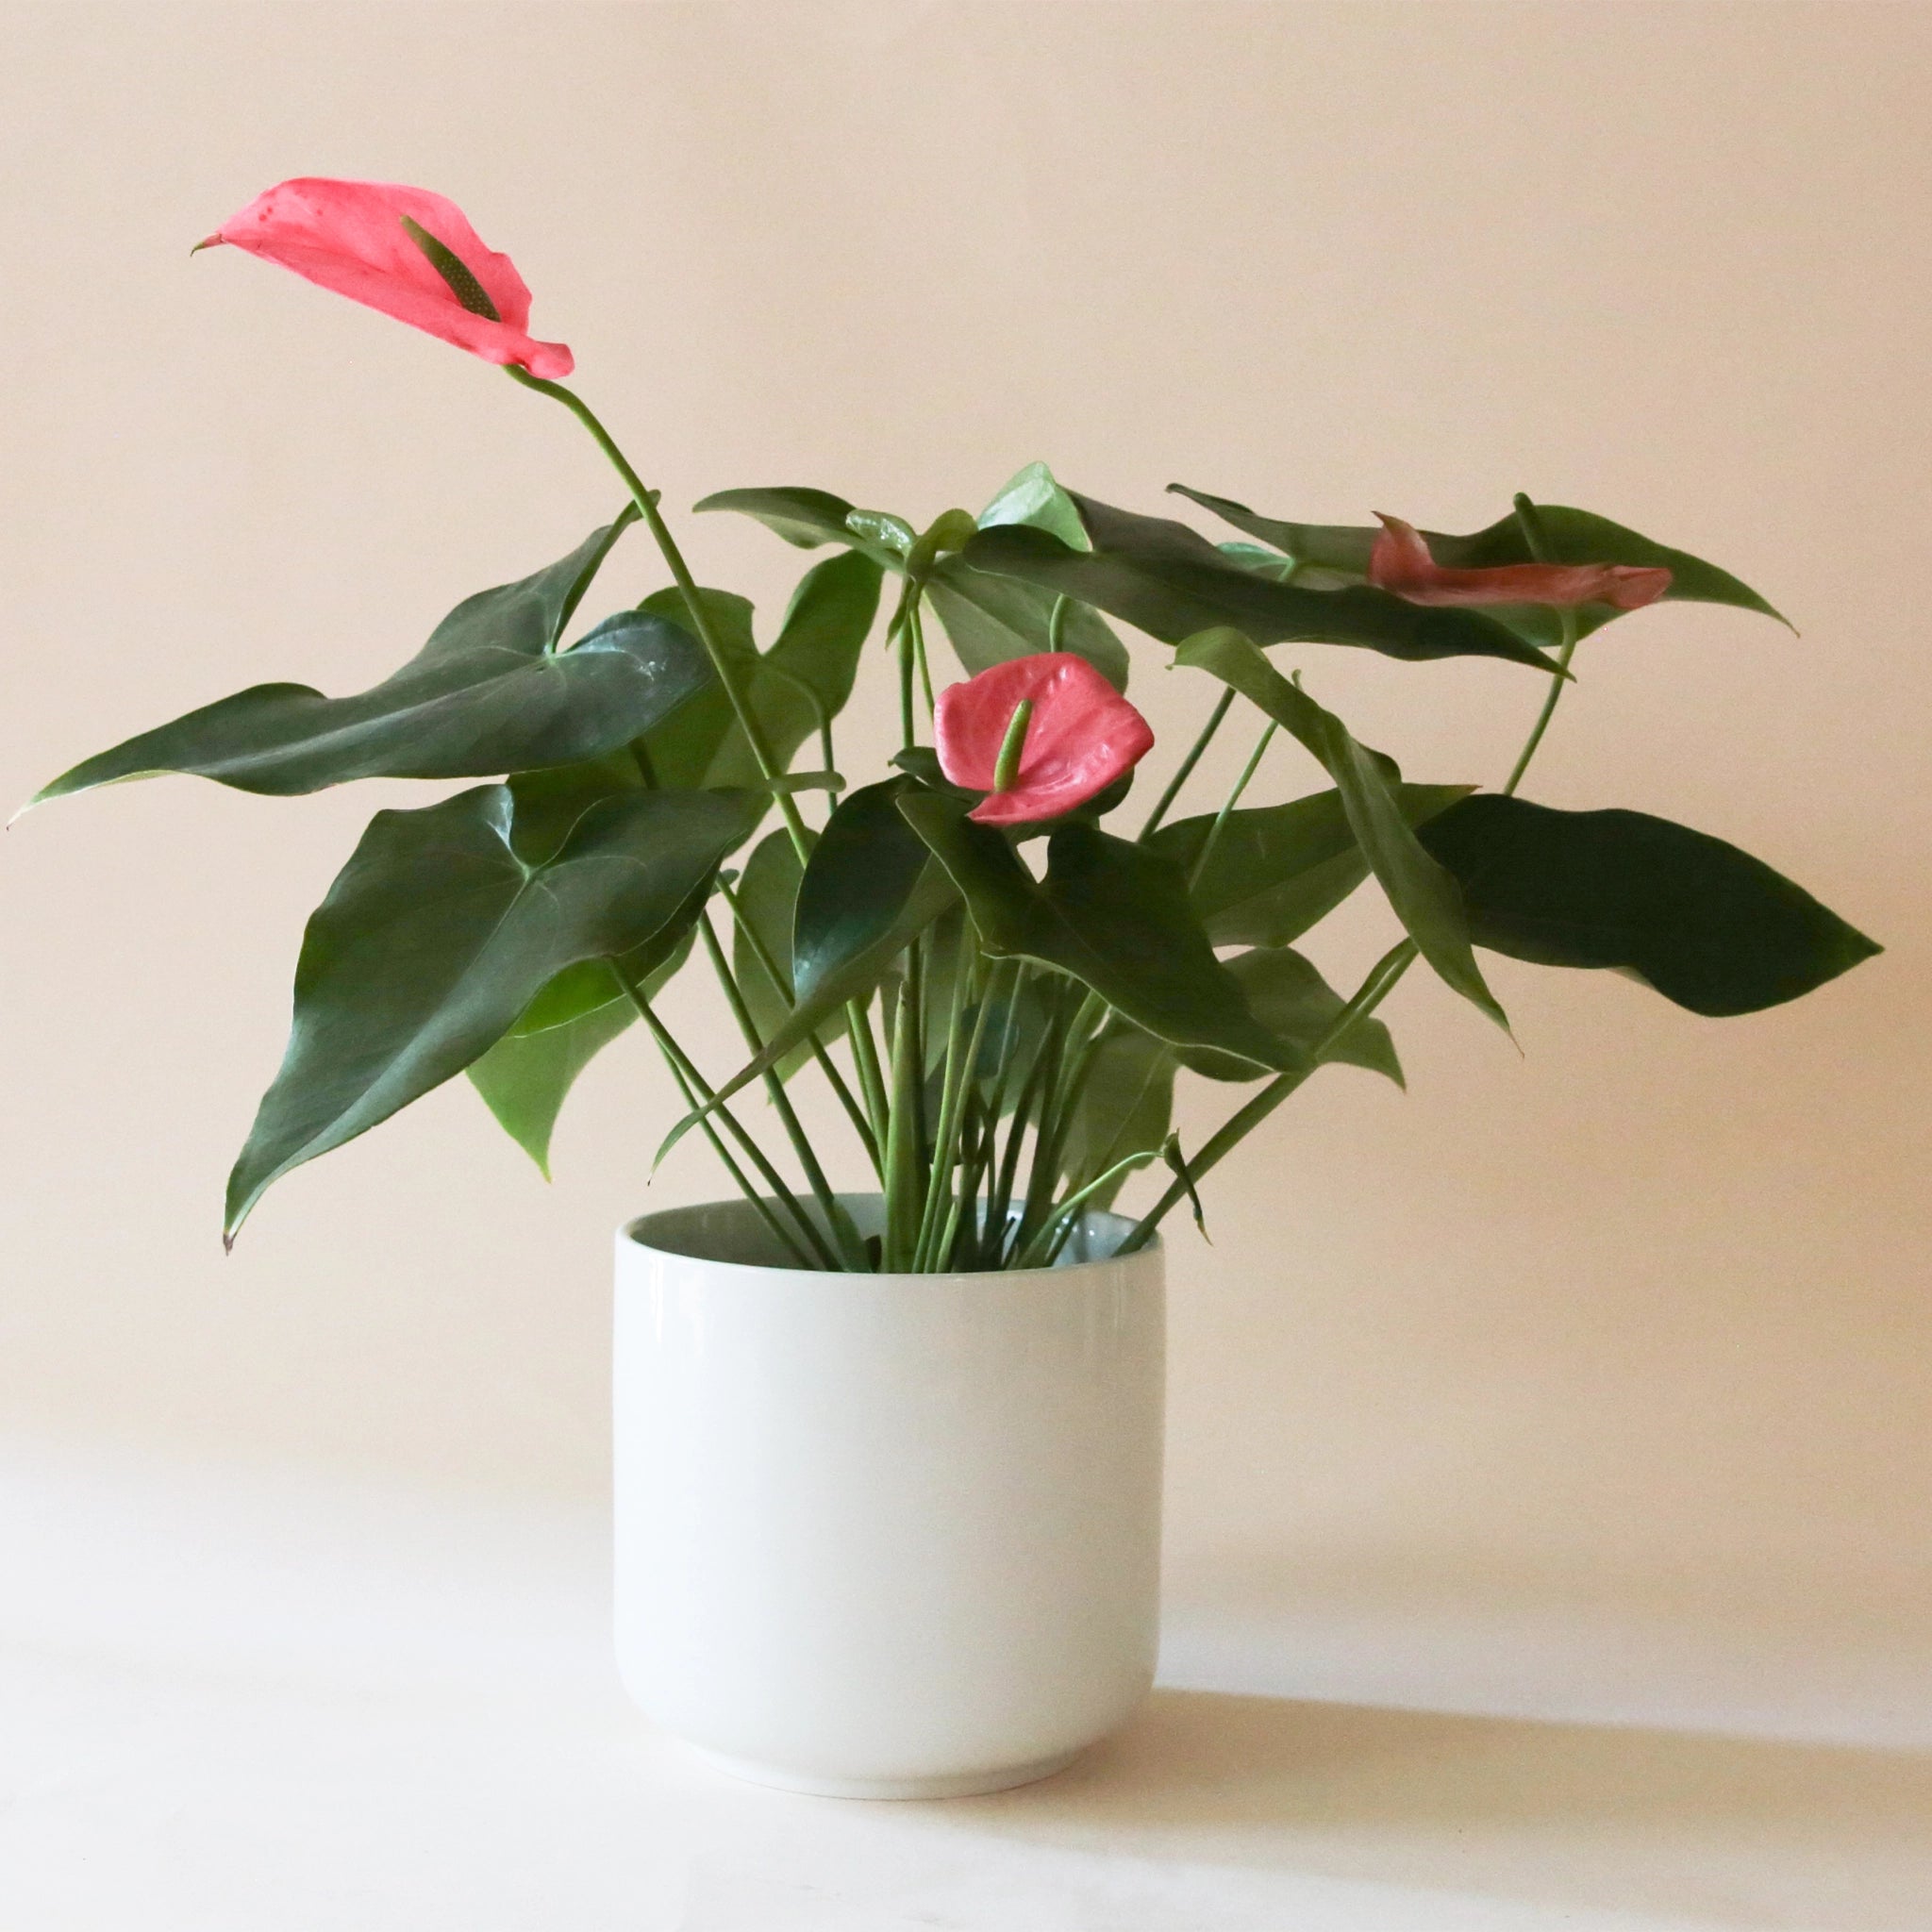 On a cream background is a green plant with bright pink Anthurium flowers and photographed in a white planter that is not included.